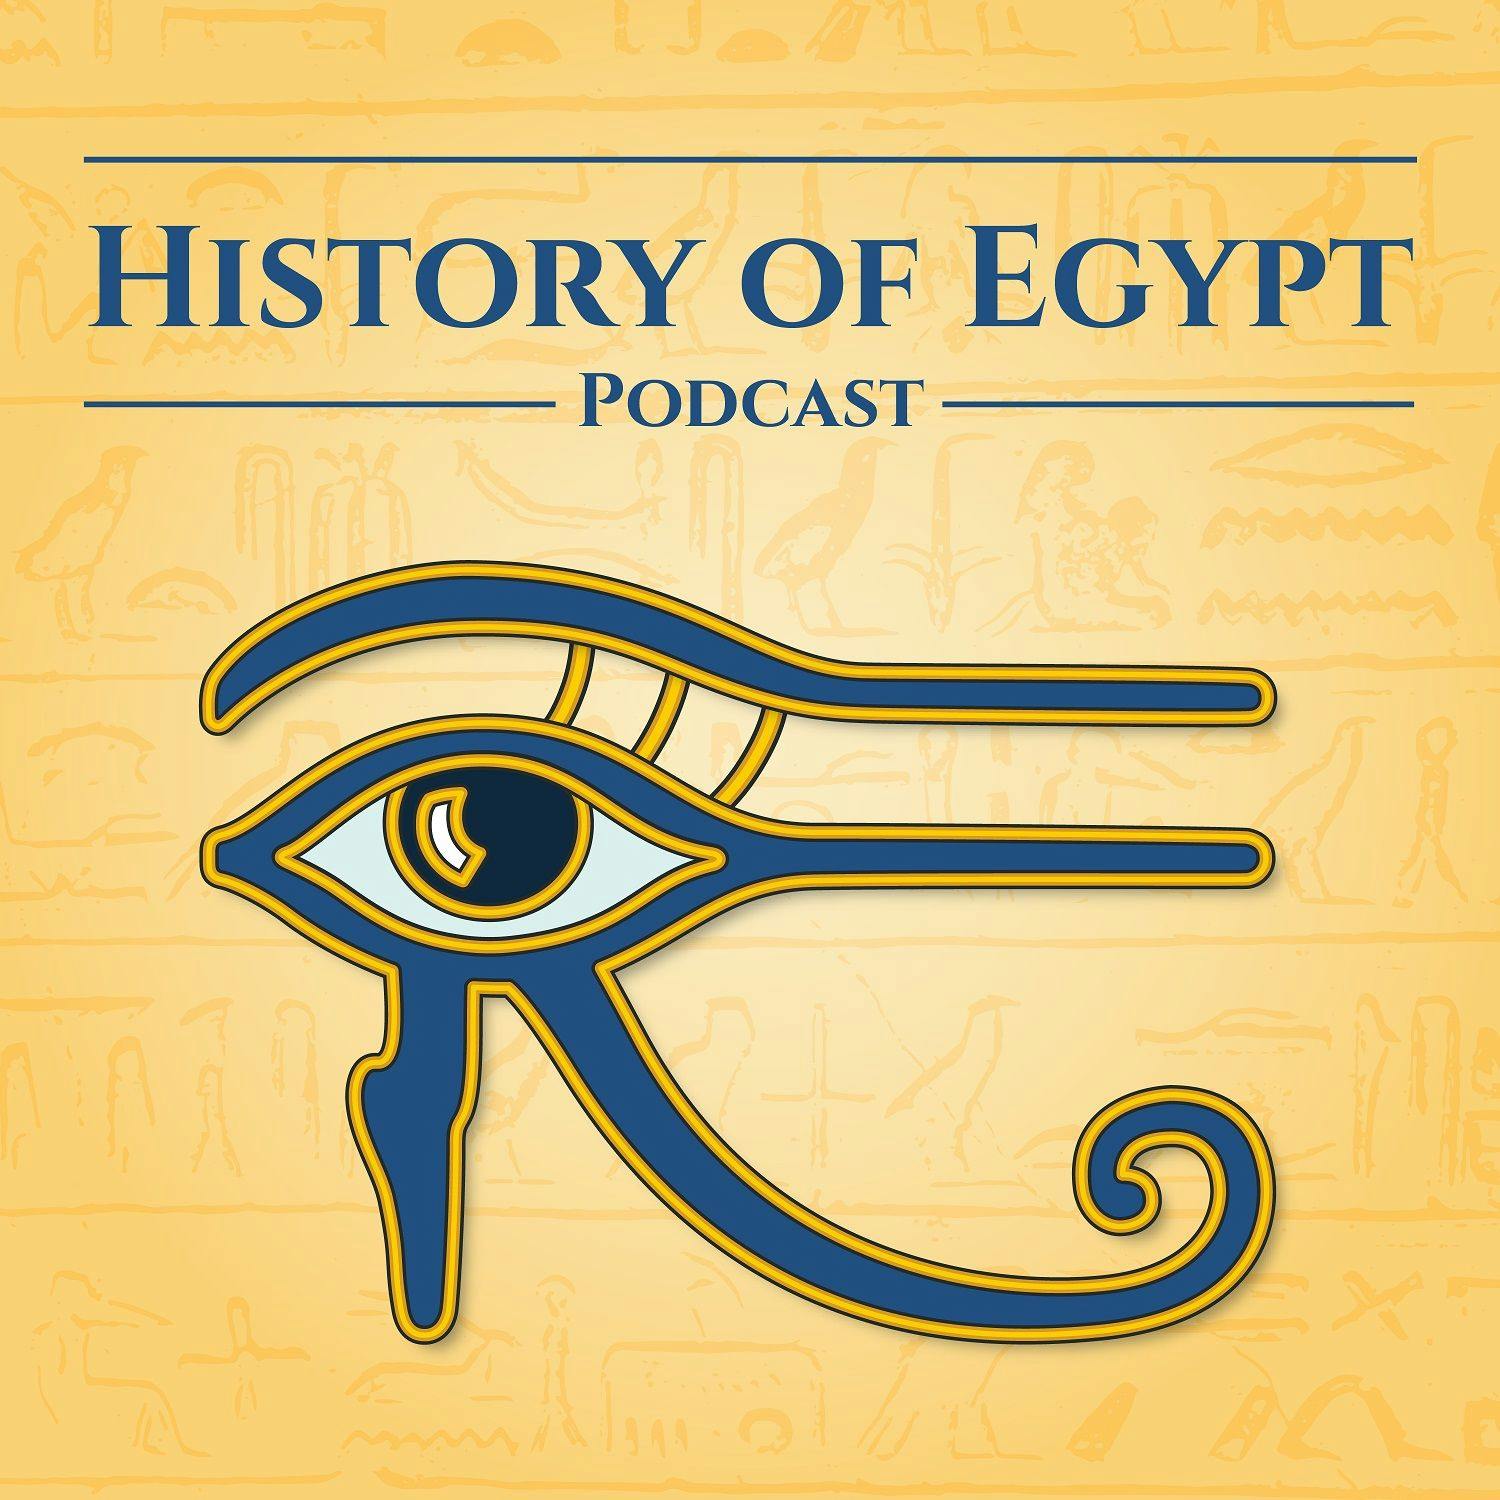 The History of Egypt Podcast podcast show image